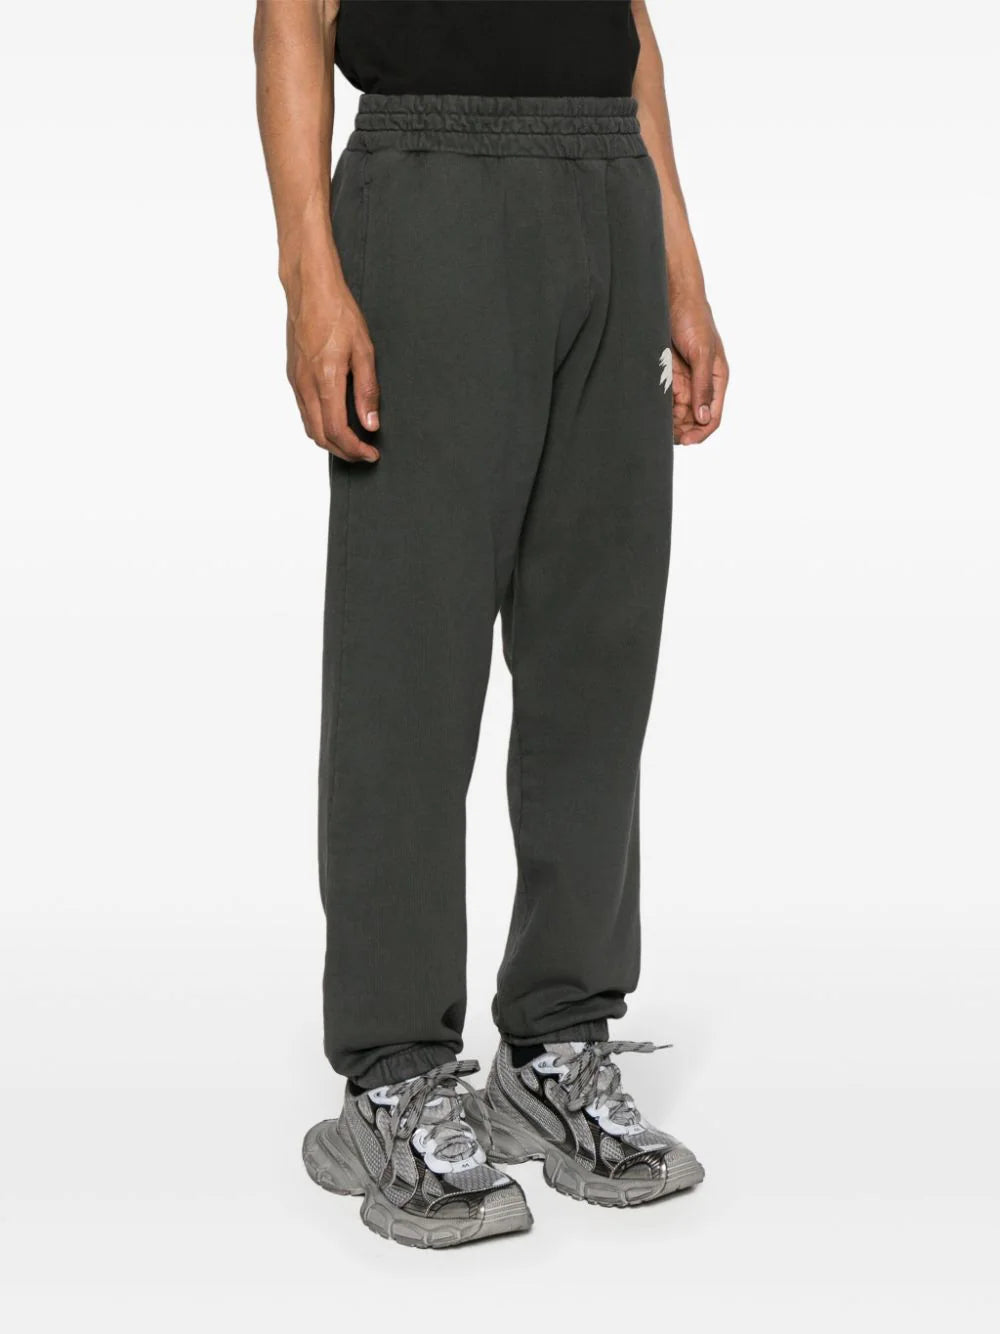 The Palm cotton track trousers